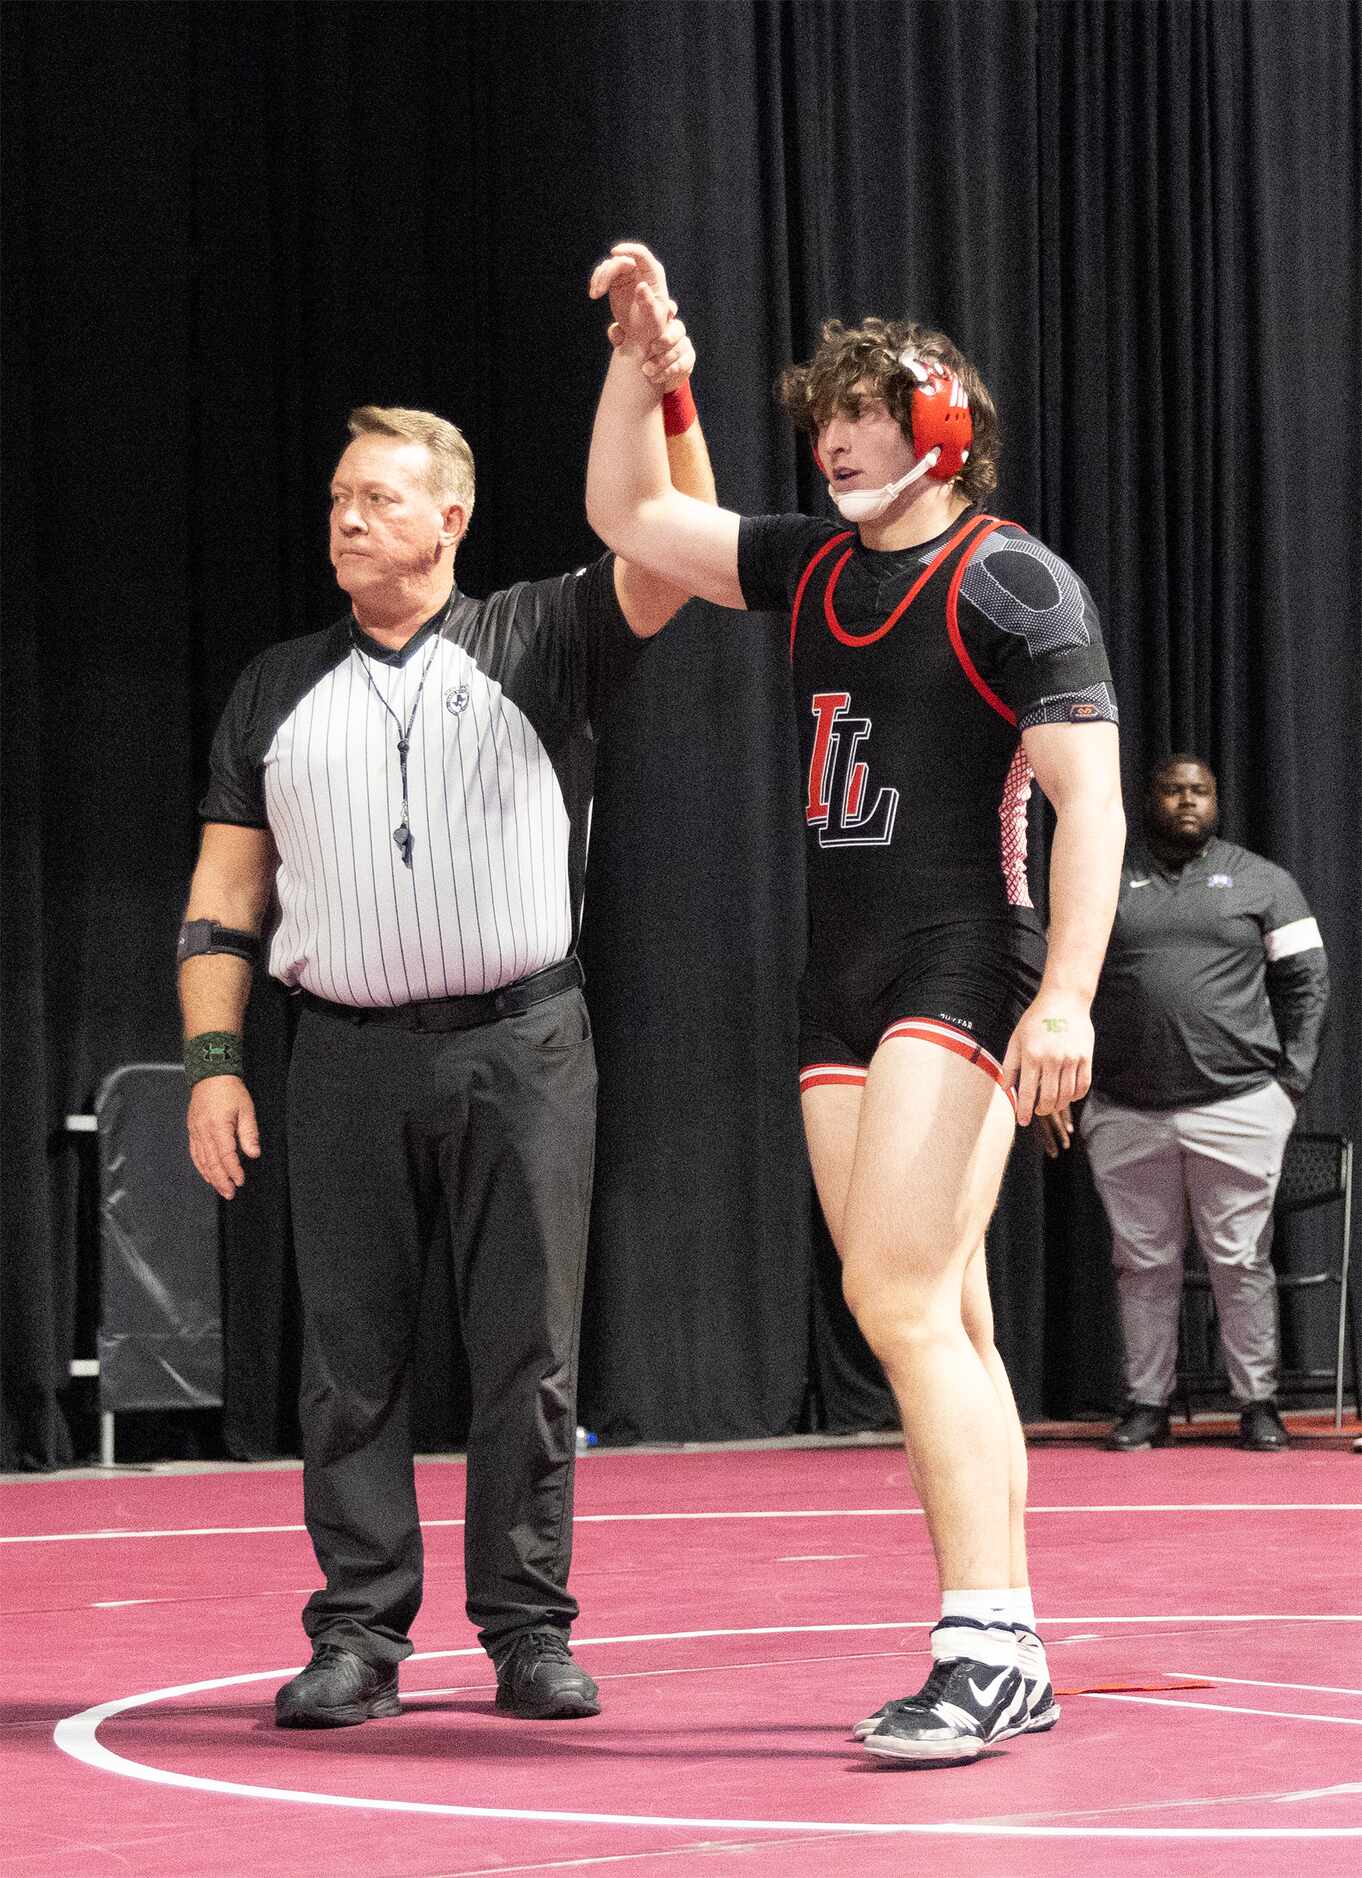 An official raises the hand of Payton Pierce from Lovejoy after defeating Jack Ashley from...